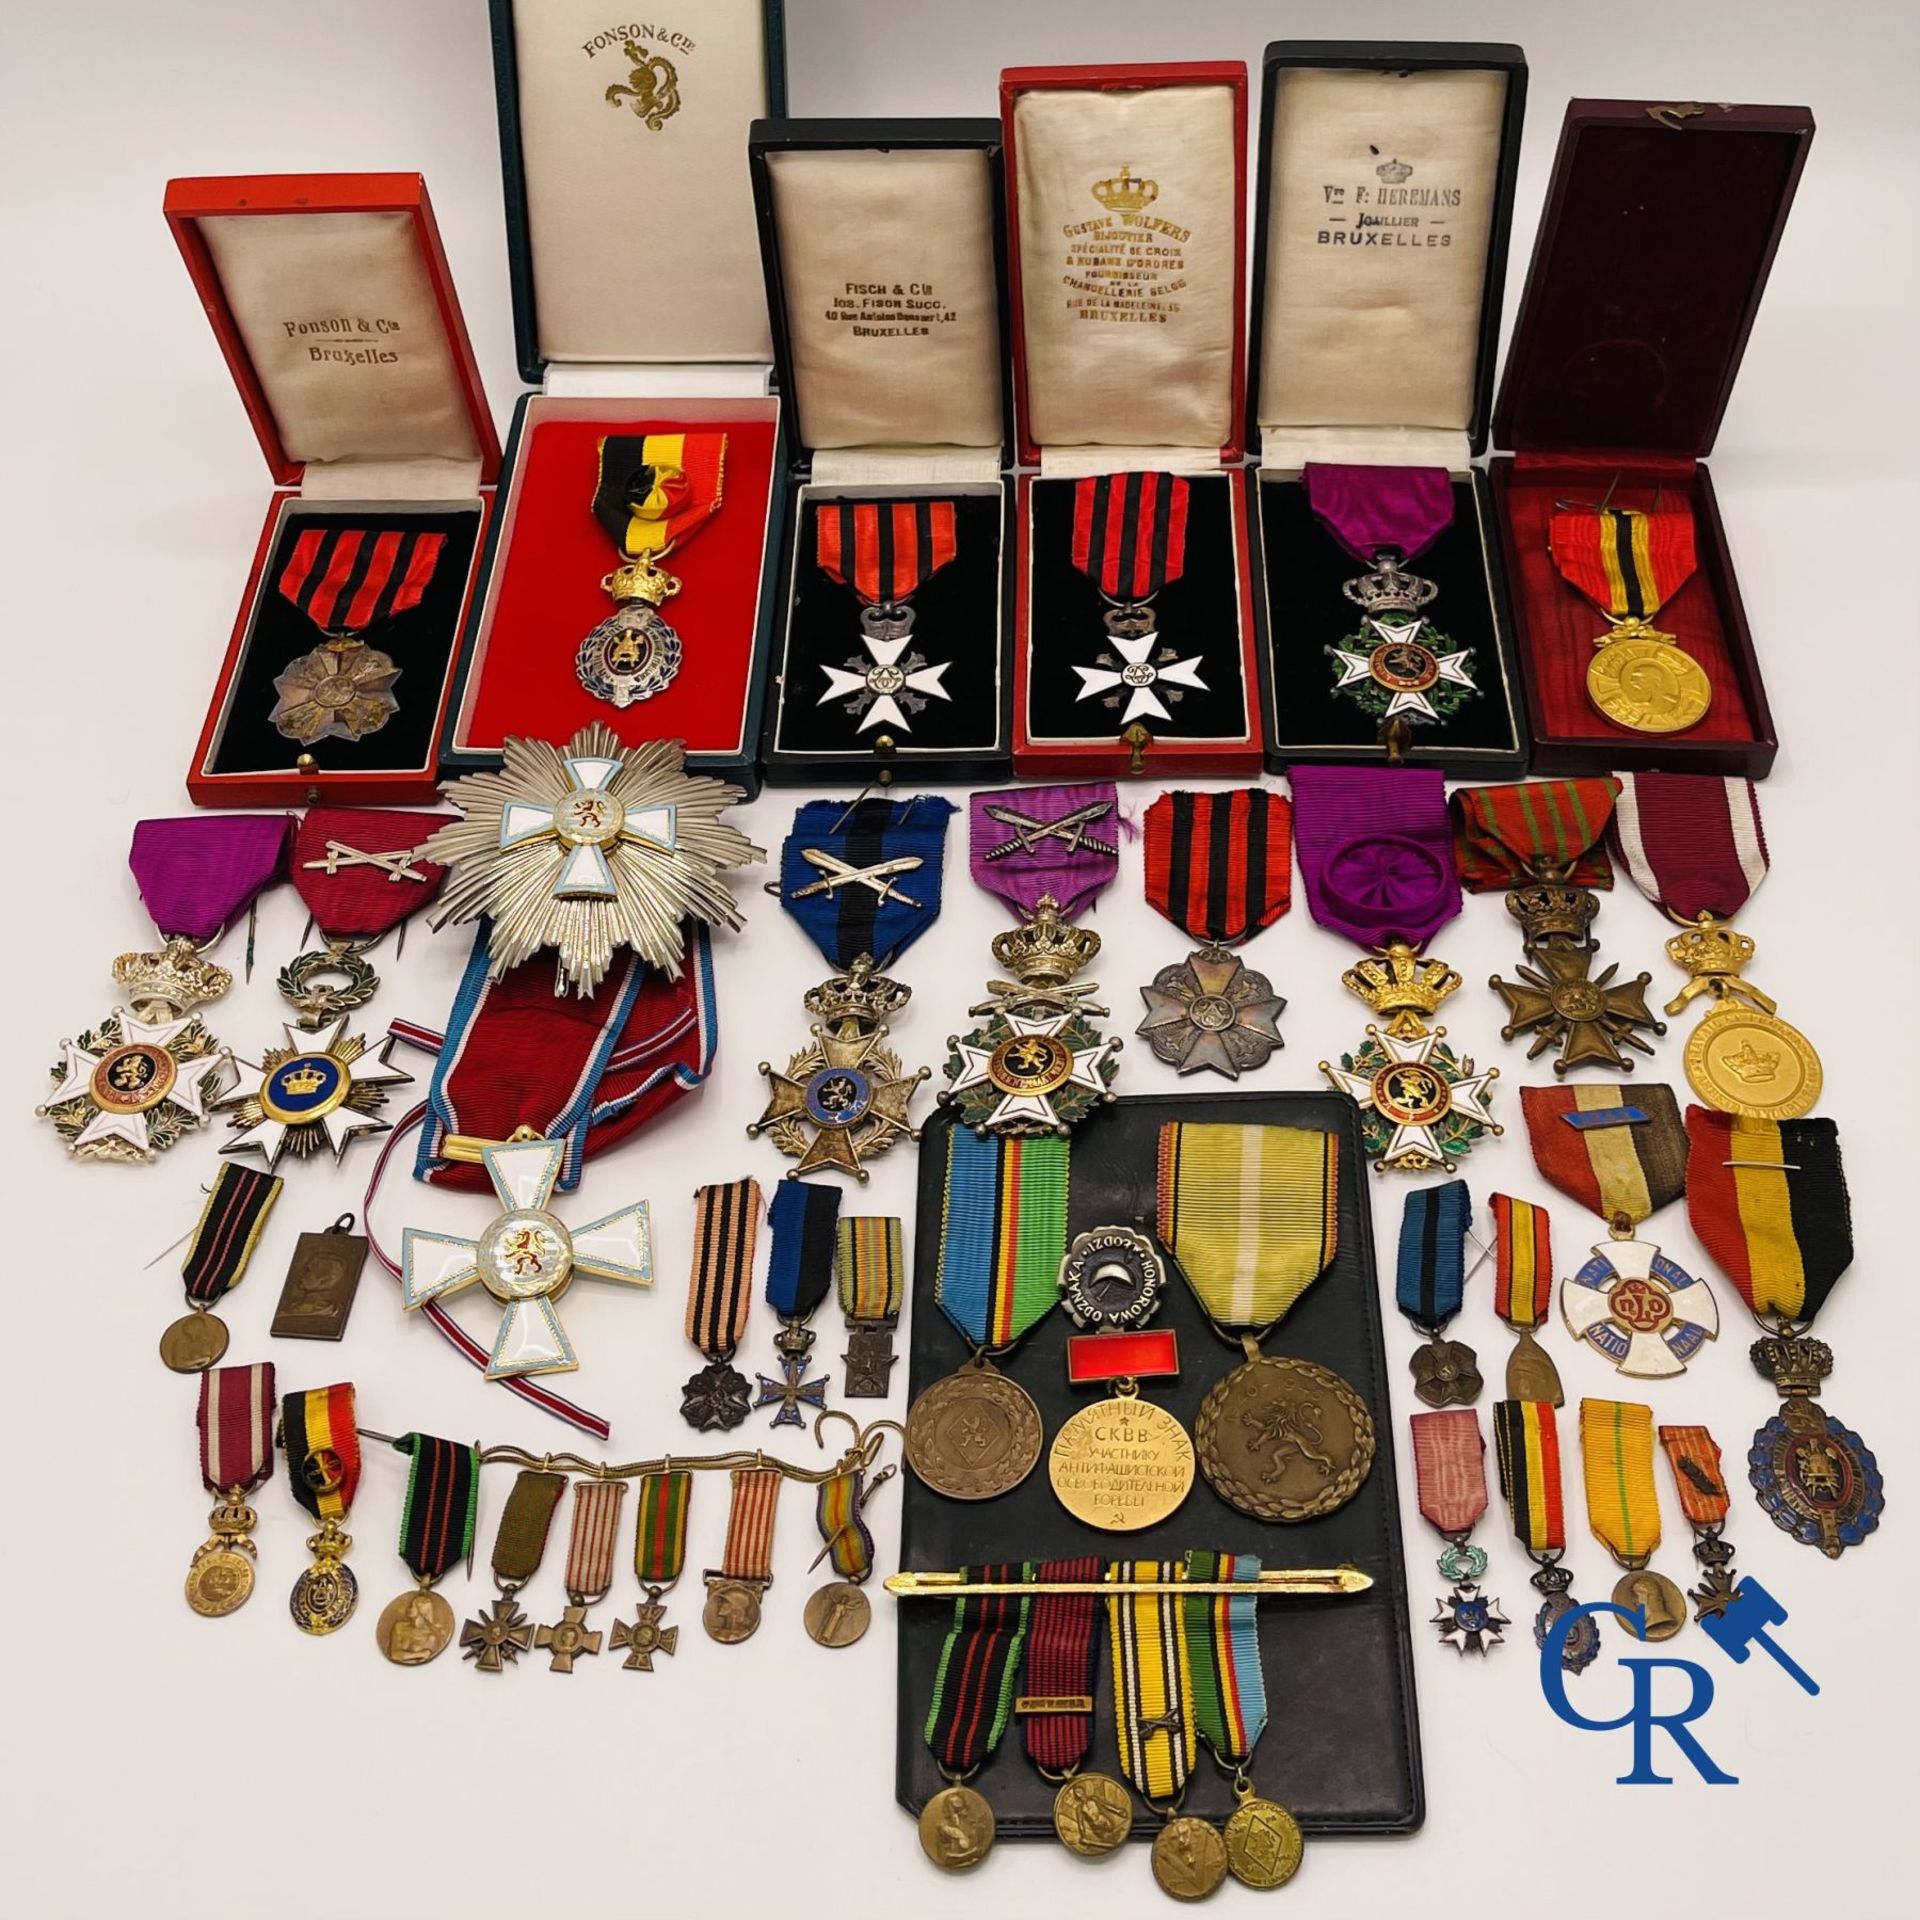 Medals - Honor badges - Decorations: Large lot of different medals/decorations and miniature decorat